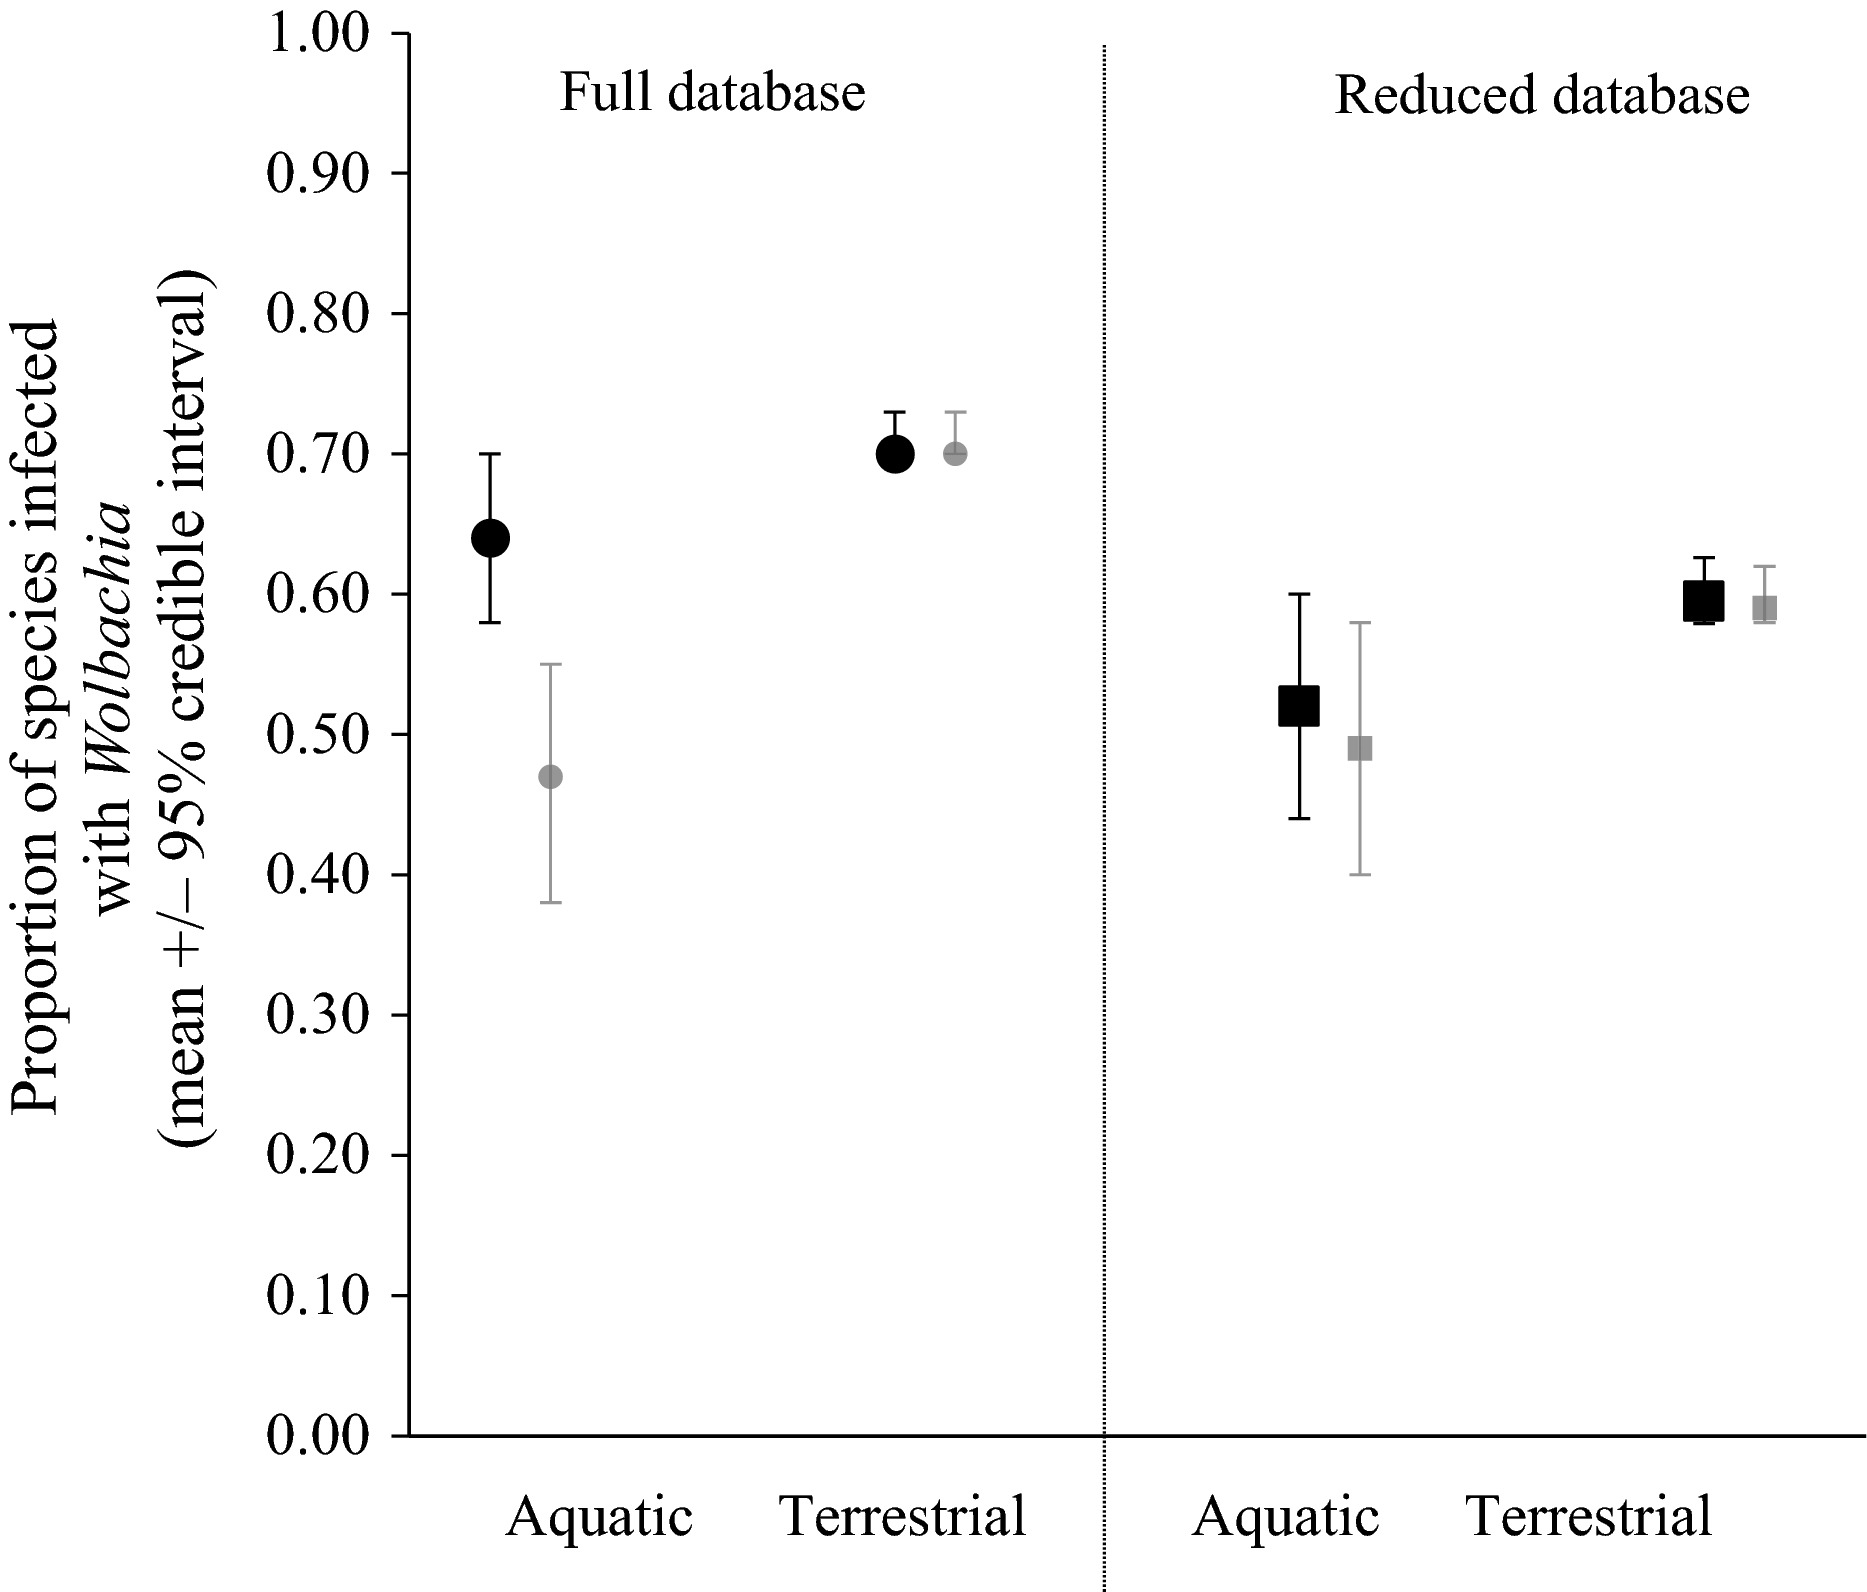 Mean (+/- 95% credible intervals) of Wolbachia incidence in aquatic versus terrestrial insects. Circles represent estimates from the full dataset. Squares represent estimates from the reduced database retaining only one sample per species (sample with the maximum number of screens). Black symbols include Culicidae. Gray symbols do not.